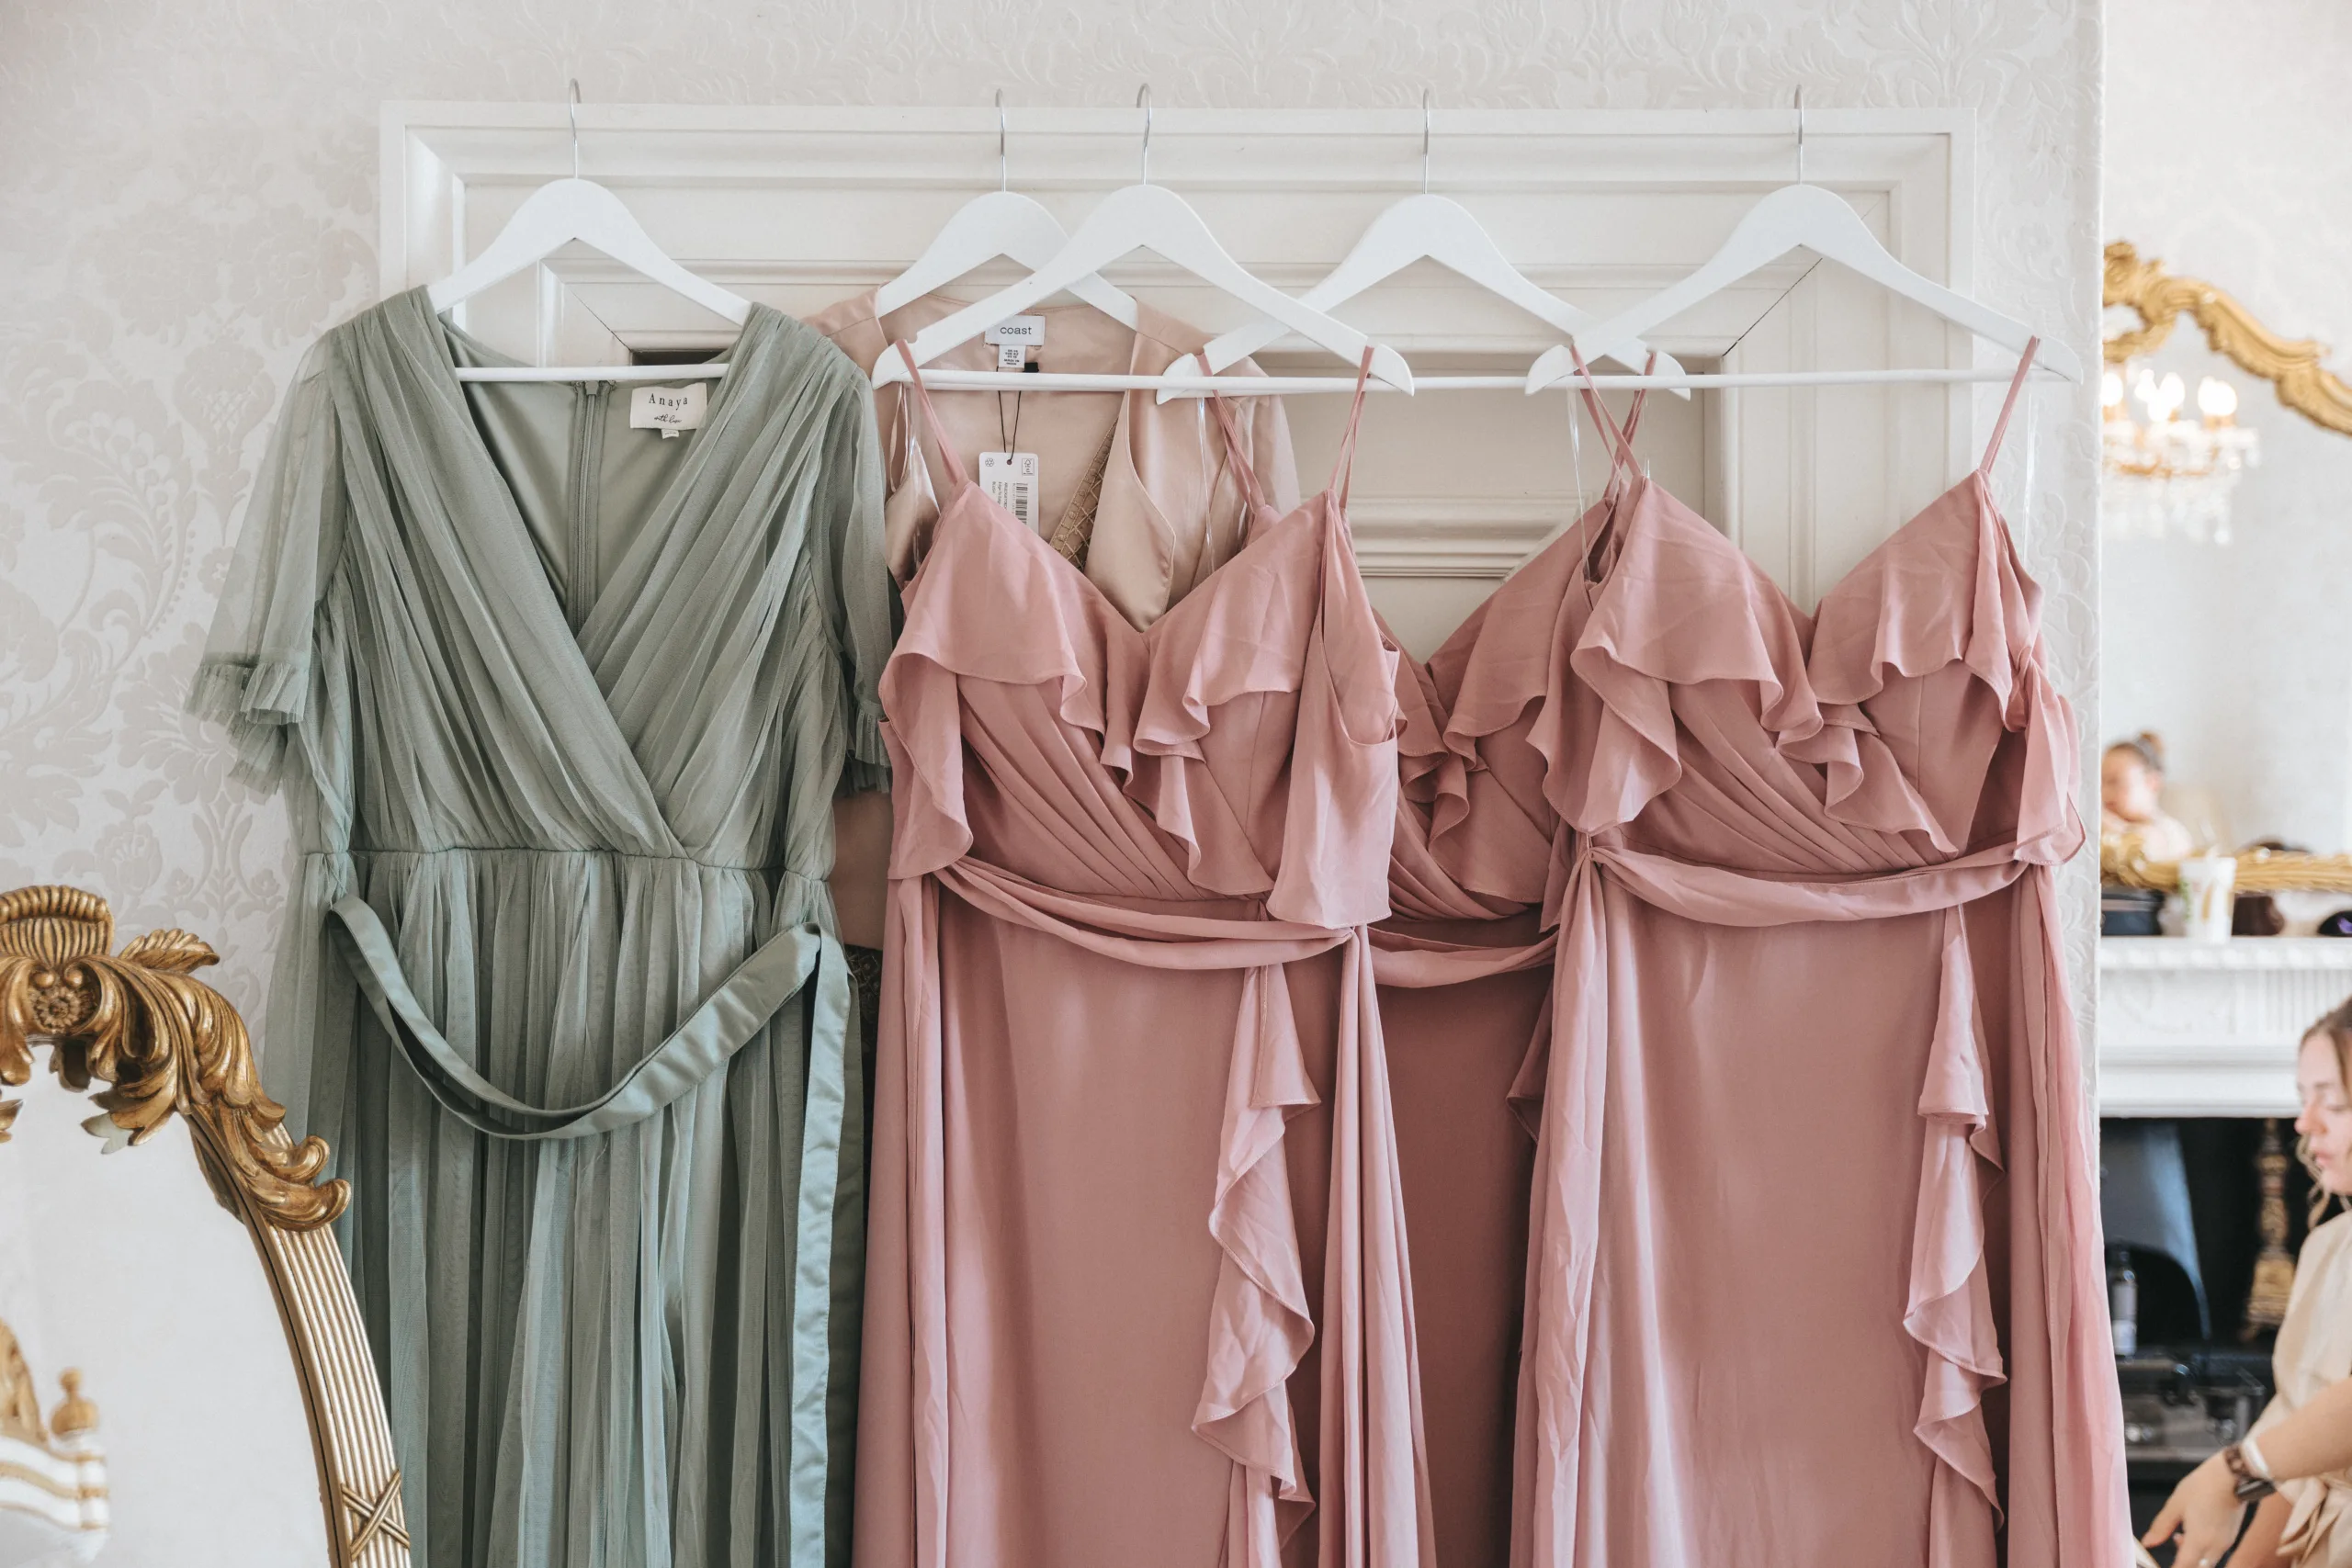 Bridesmaid dresses hanging in a room captured by a wedding photographer from Lincolnshire.